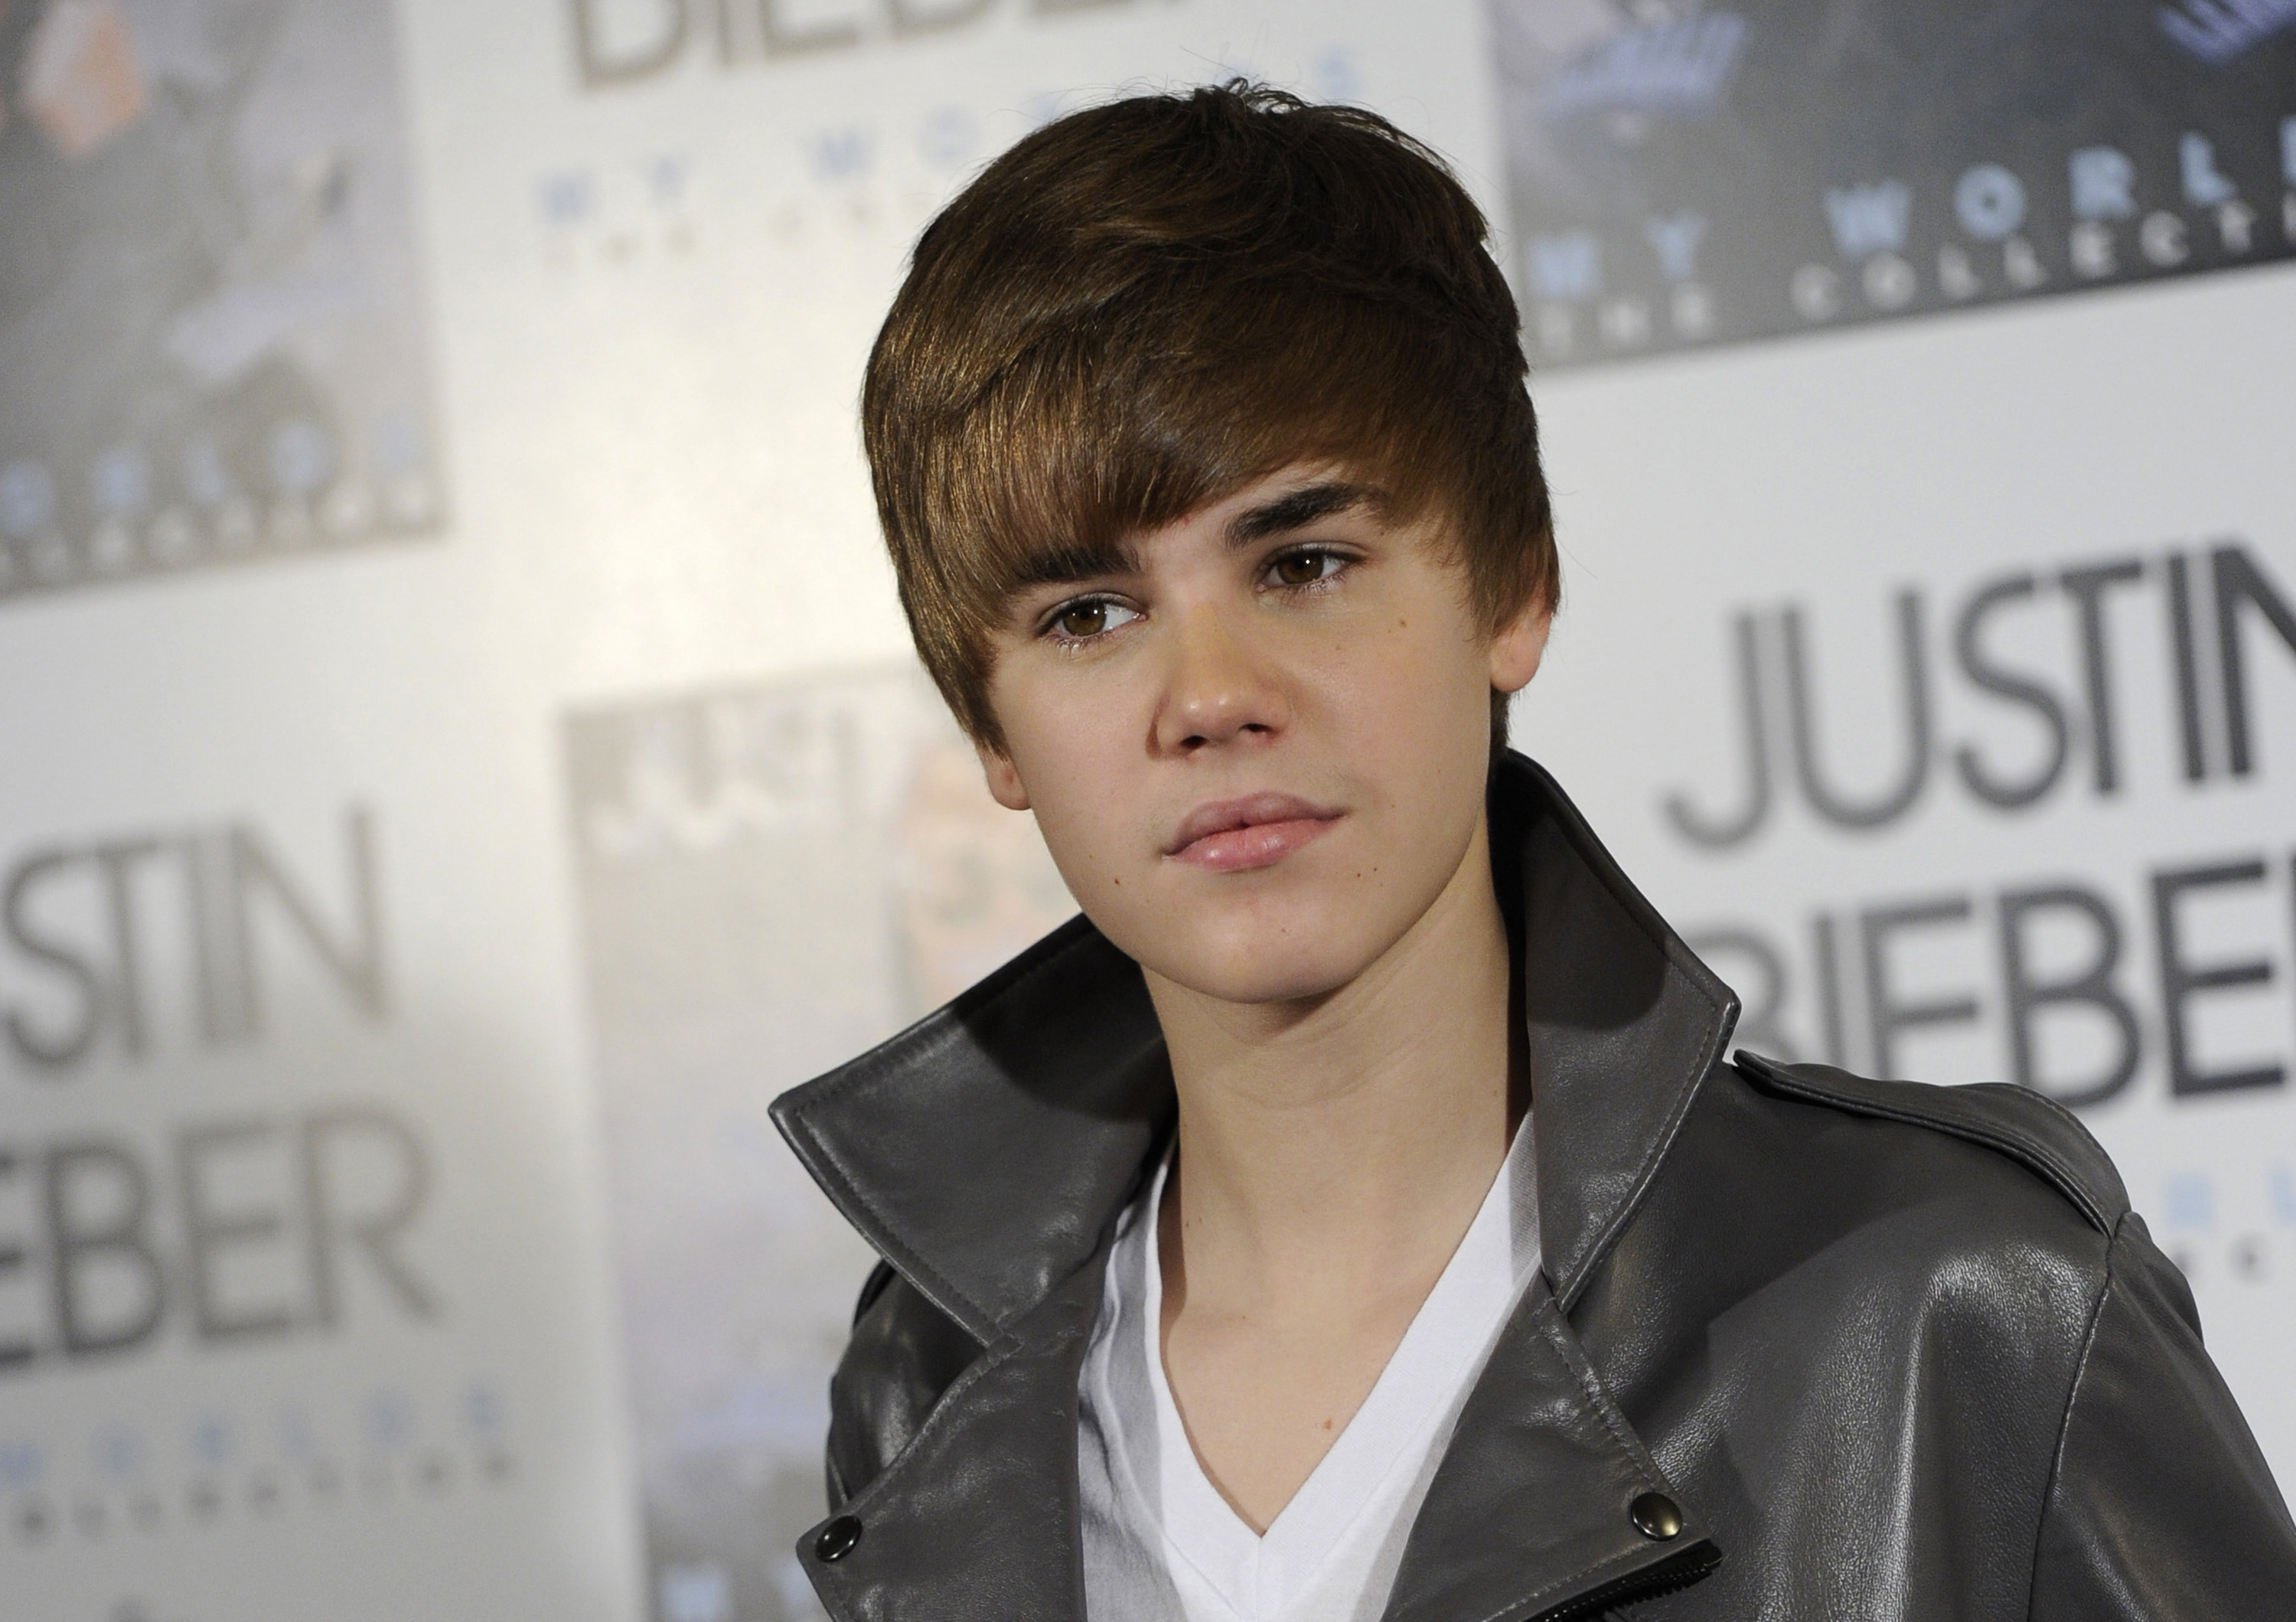 Close-up of Justin as a teen at a media event